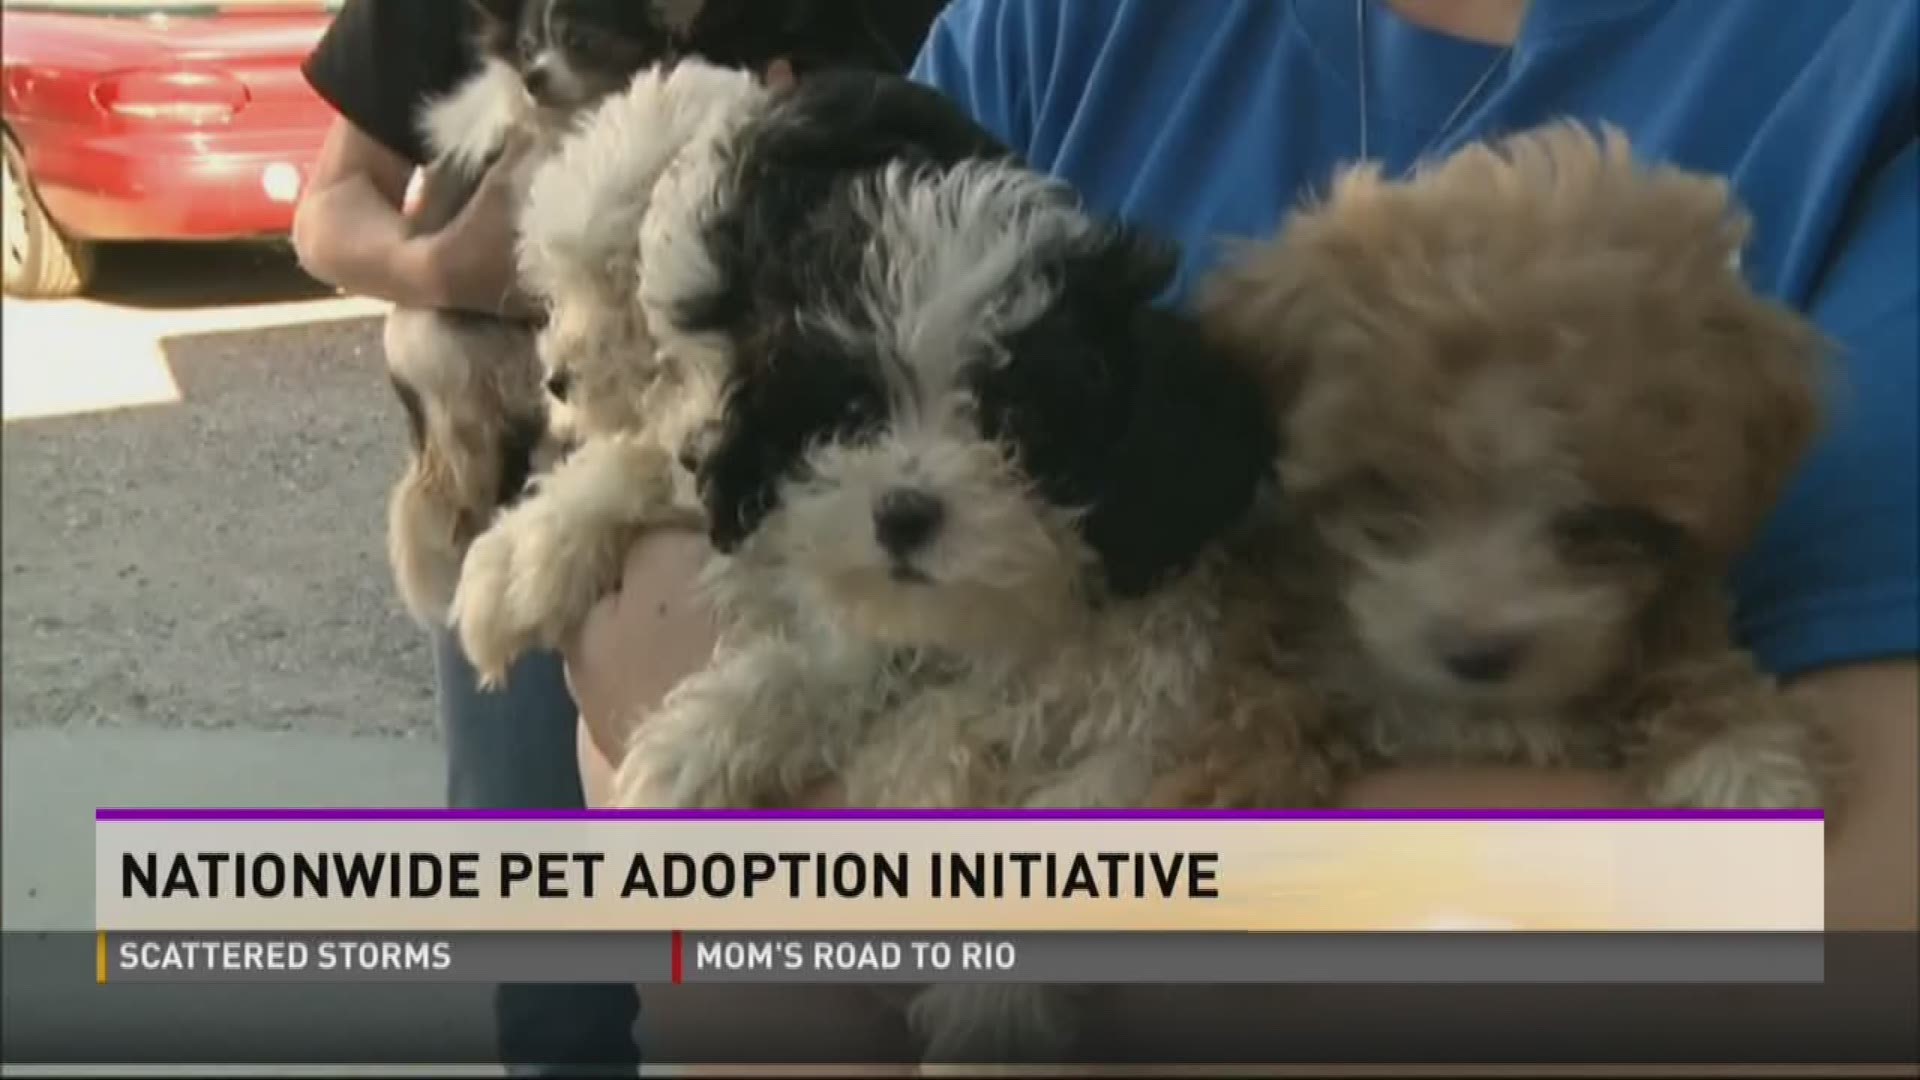 The Clear the Shelters event will help find forever homes for animals in need all across the country.